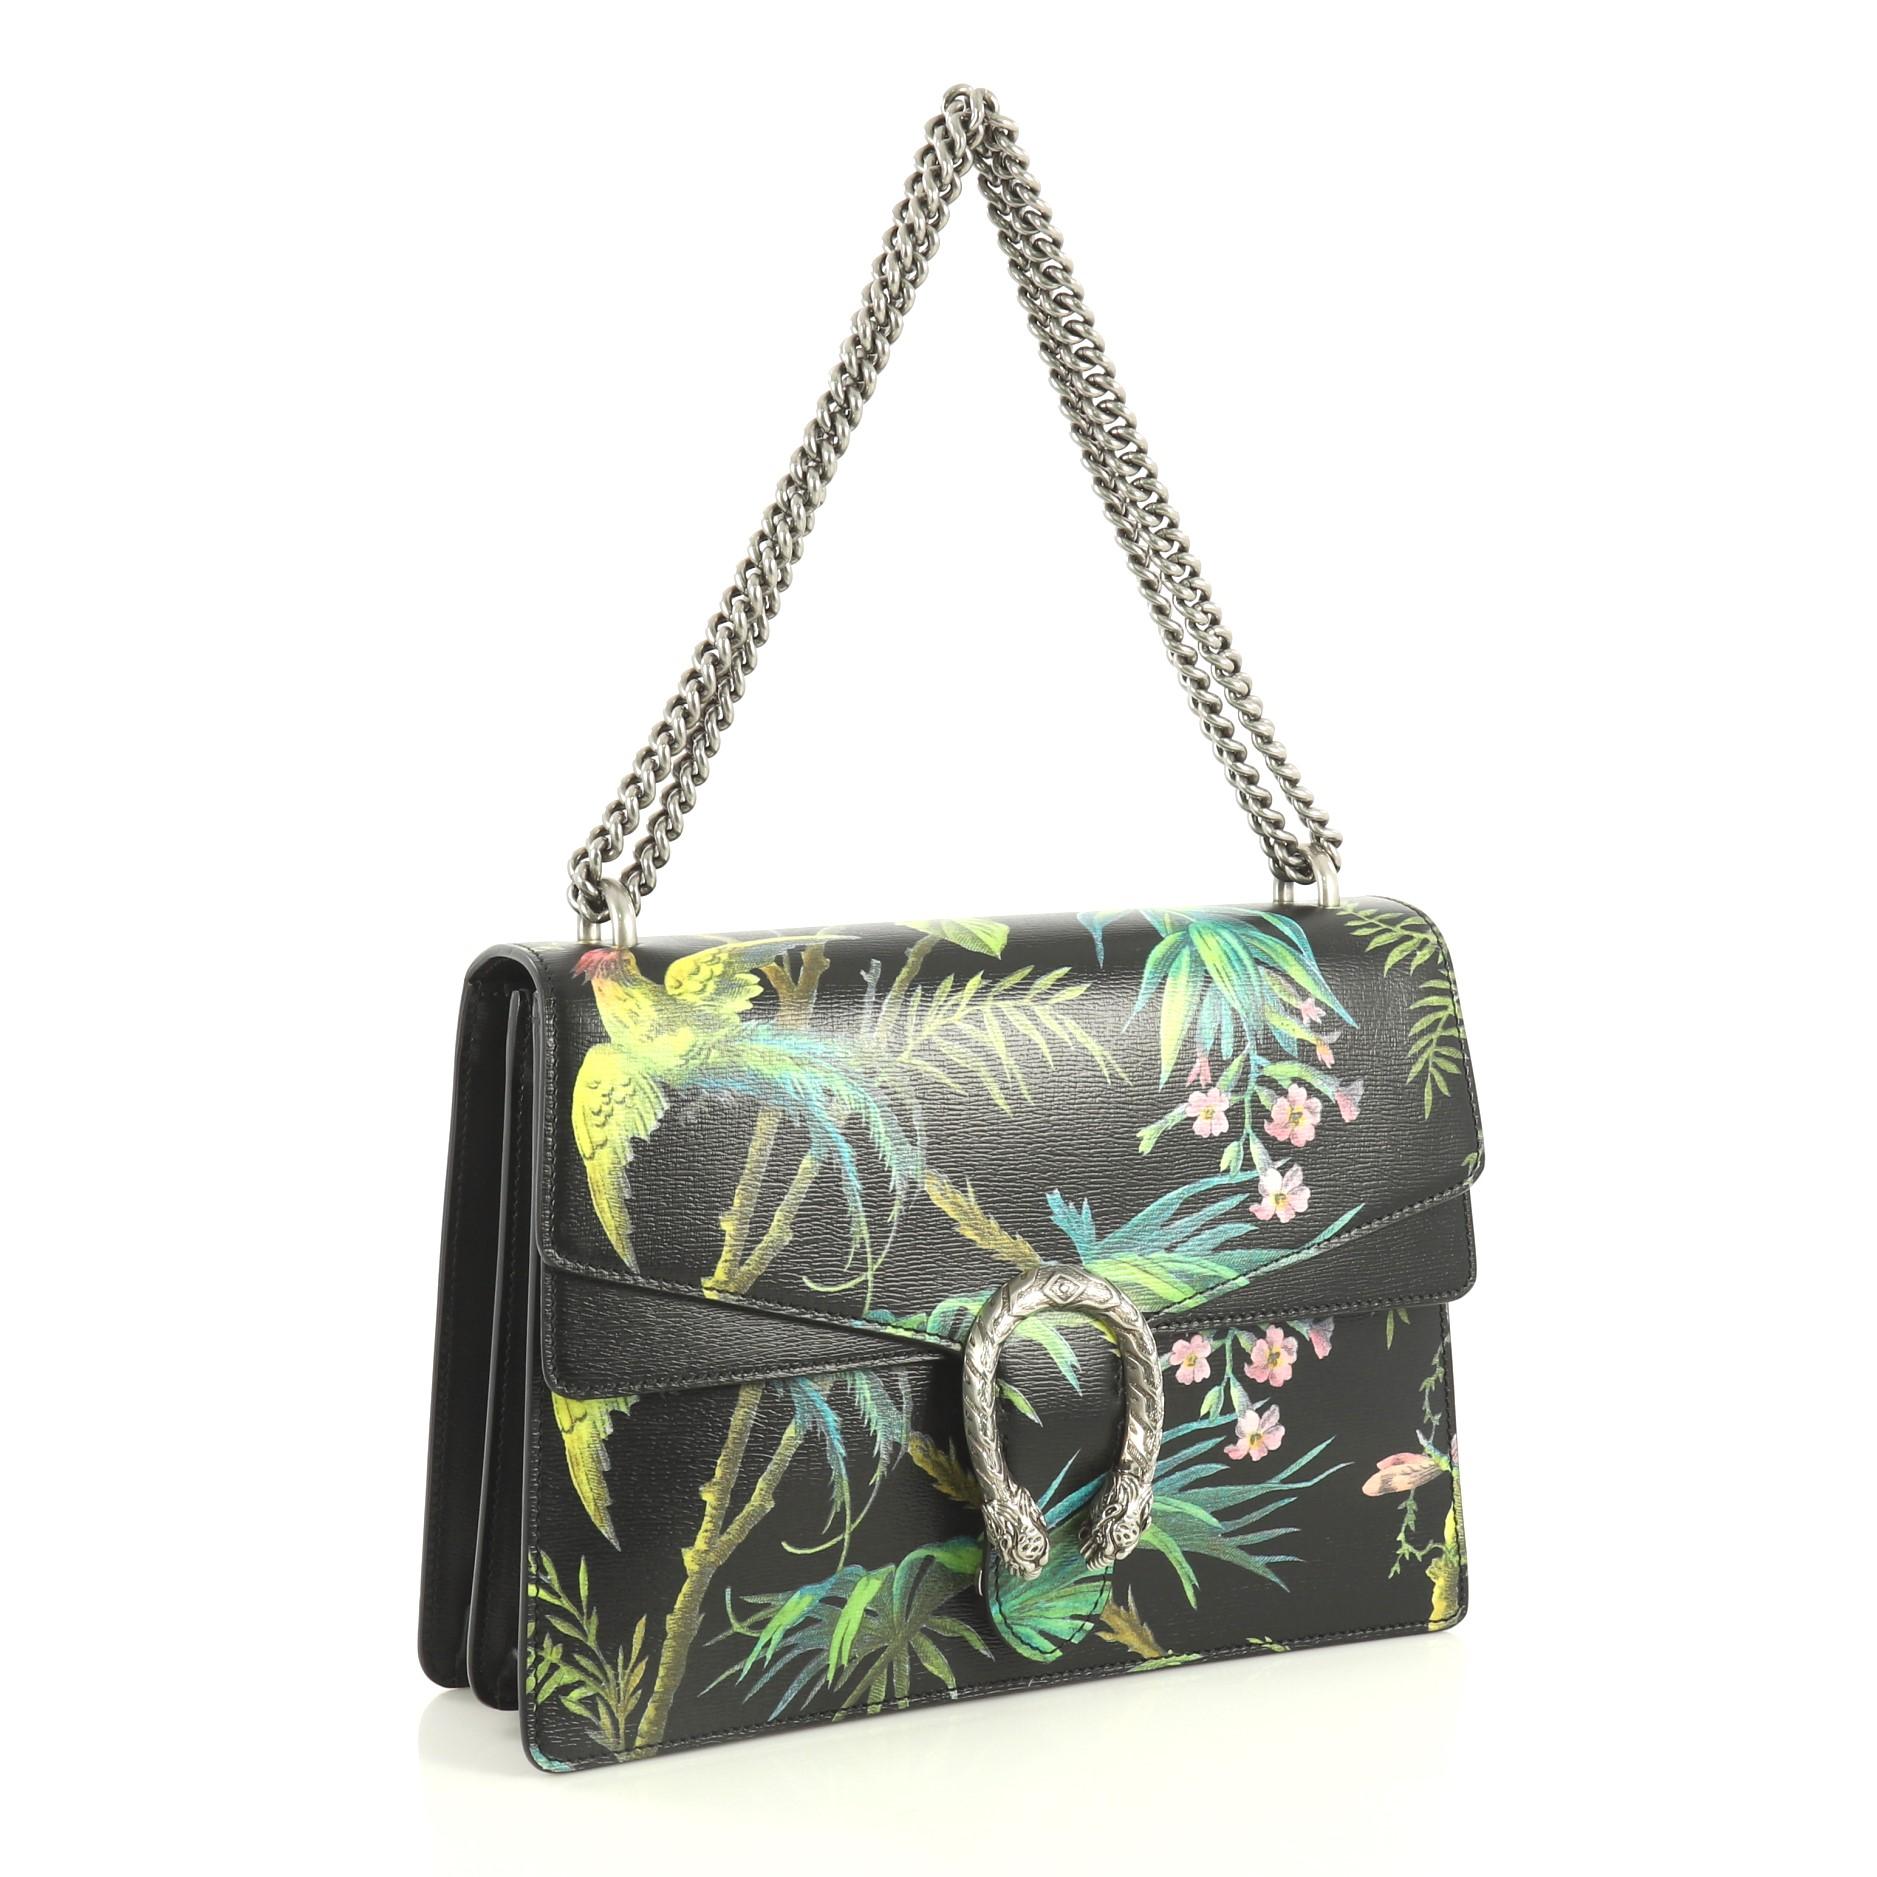 This Gucci Dionysus Bag Tropical Print Leather Medium, crafted from black printed leather, features chain link strap, textured tiger head spur detail on its flap, tropical print motif and aged silver-tone hardware. Its hidden push-pin closure opens